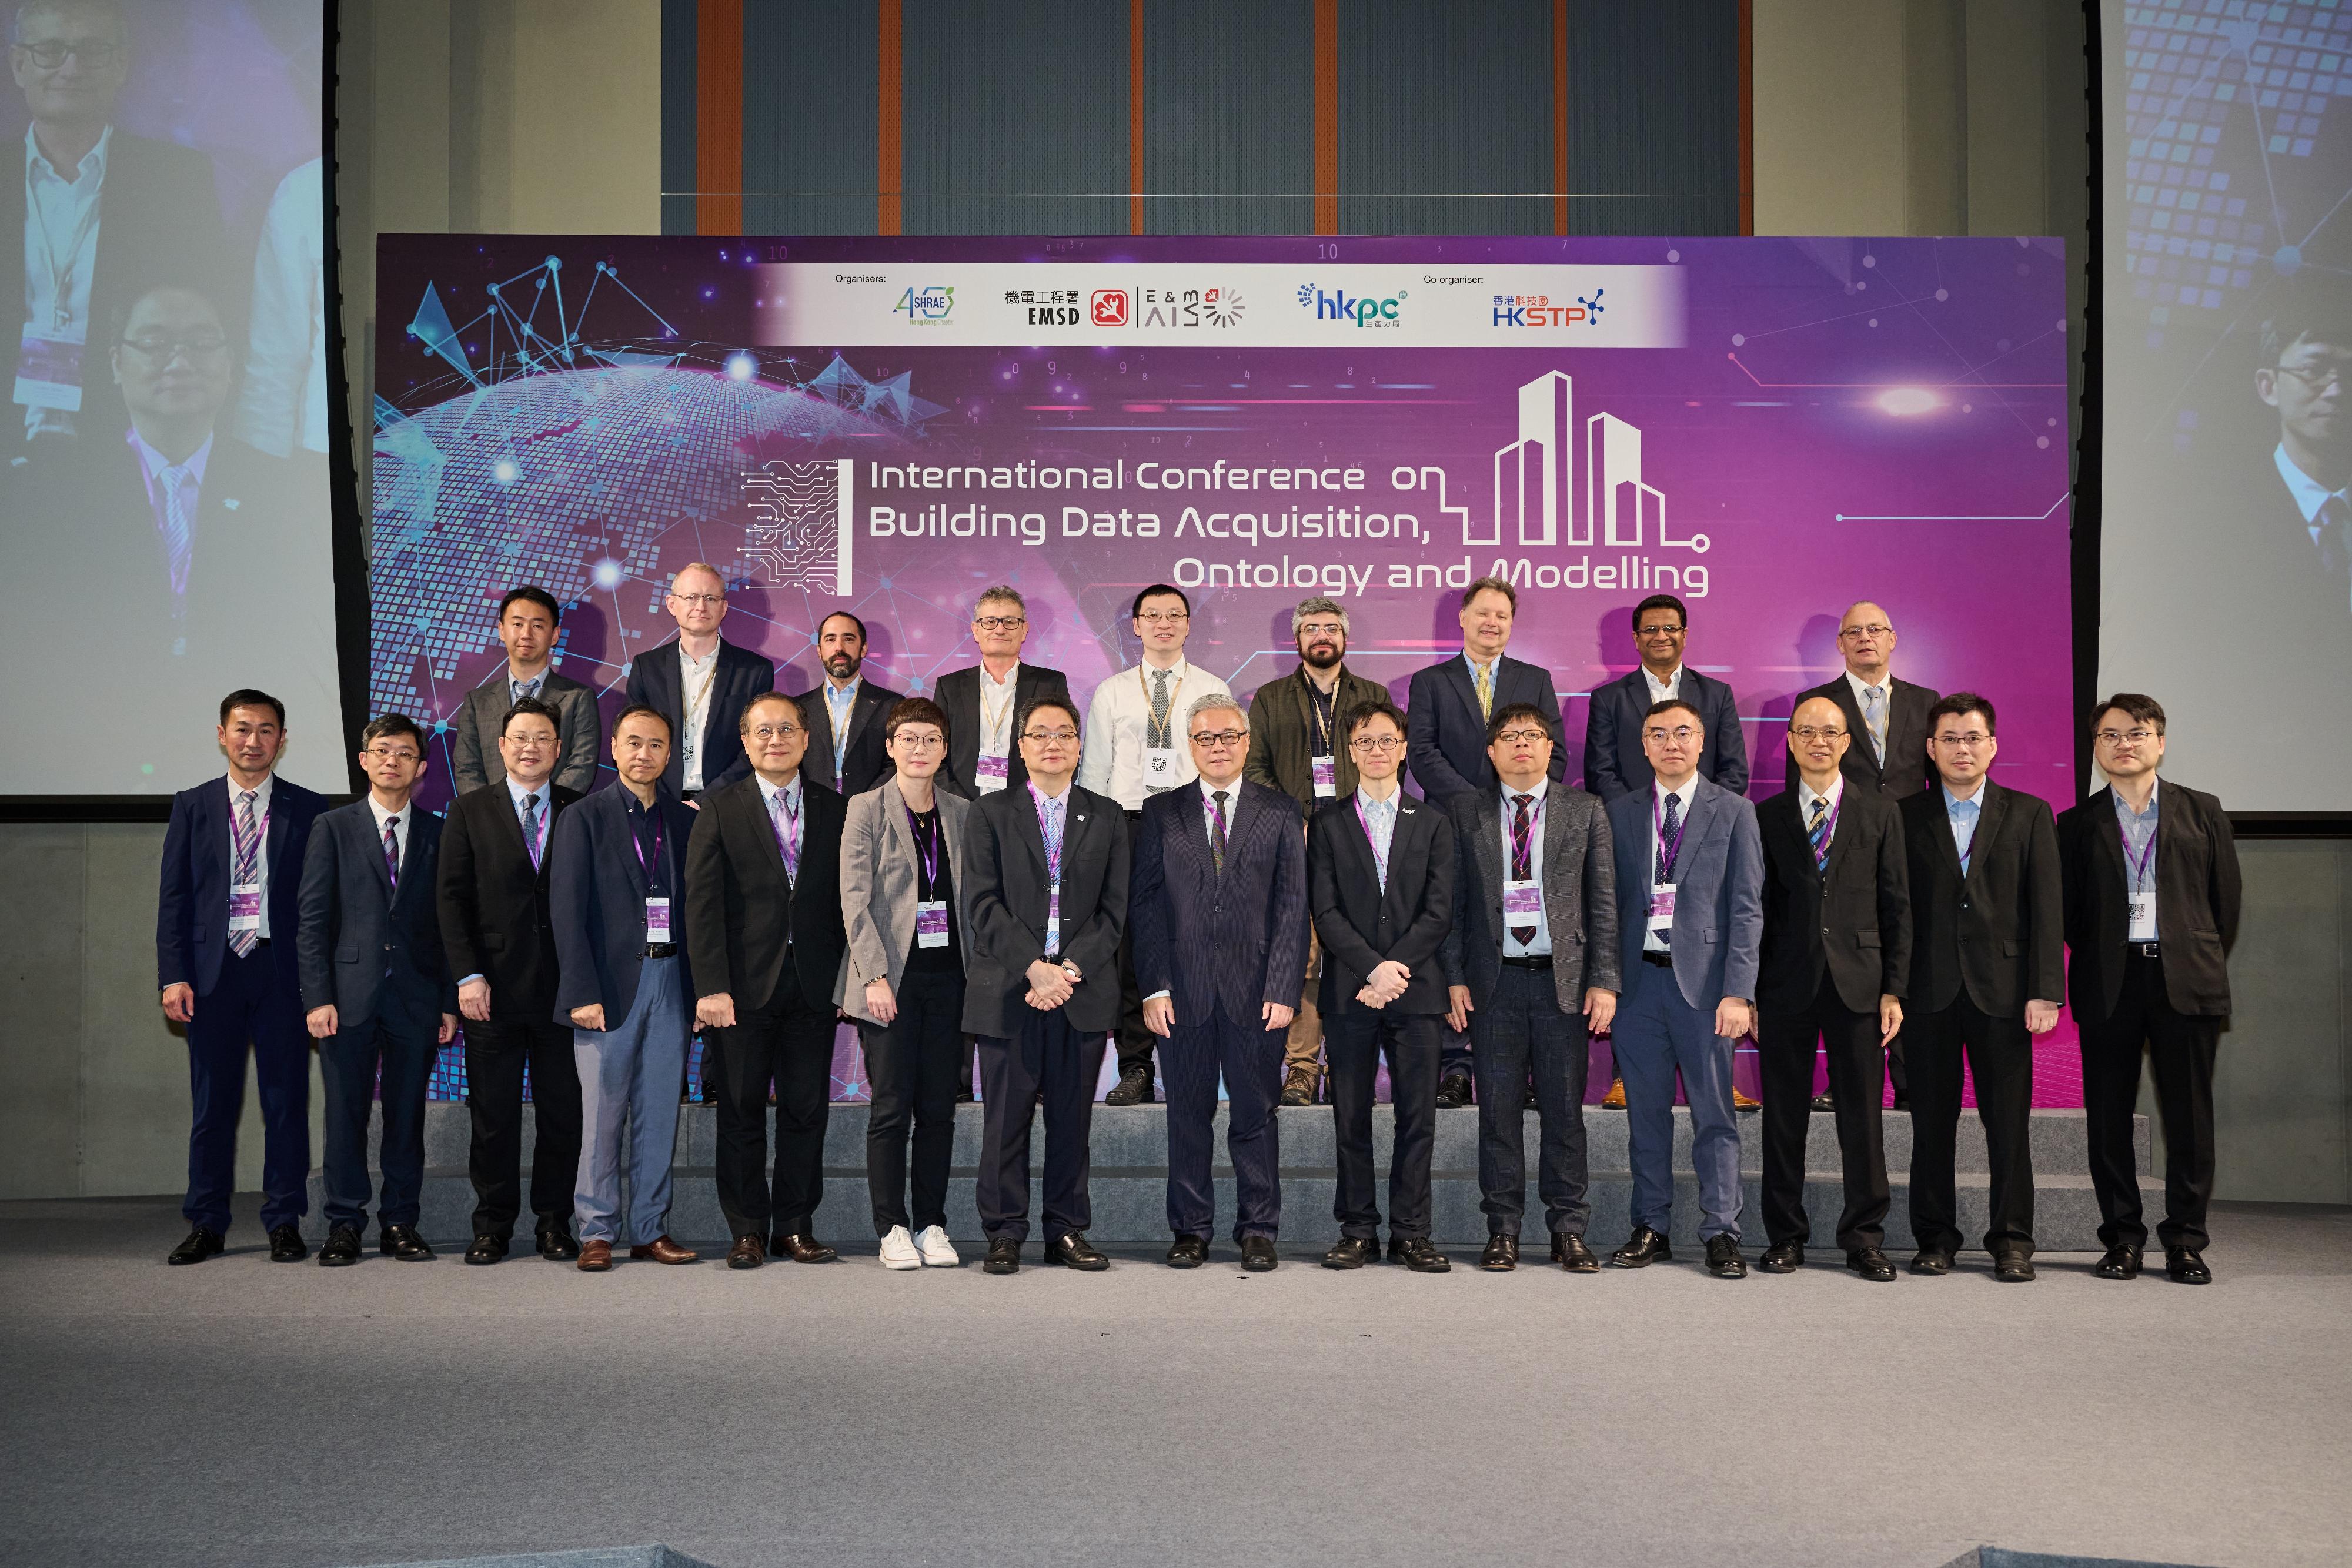 The International Conference on Building Data Acquisition, Ontology and Modeling jointly organised by the Electrical and Mechanical Services Department, the American Society of Heating, Refrigerating and Air-Conditioning Engineers (ASHRAE) Hong Kong Chapter and the Hong Kong Productivity Council (HKPC) concluded today (April 24). Photo shows the Director of Electrical and Mechanical Services, Mr Raymond Poon (front row, seventh right); Deputy Secretary for Development (Works) Mr Tony Ho (front row, fifth right); the General Manager, Smart City Division of the HKPC, Mr Samson Suen (front row, sixth right); the President of the ASHRAE Hong Kong Chapter, Mr Peter Lam (front row, seventh left) and other guests and speakers at the conference.